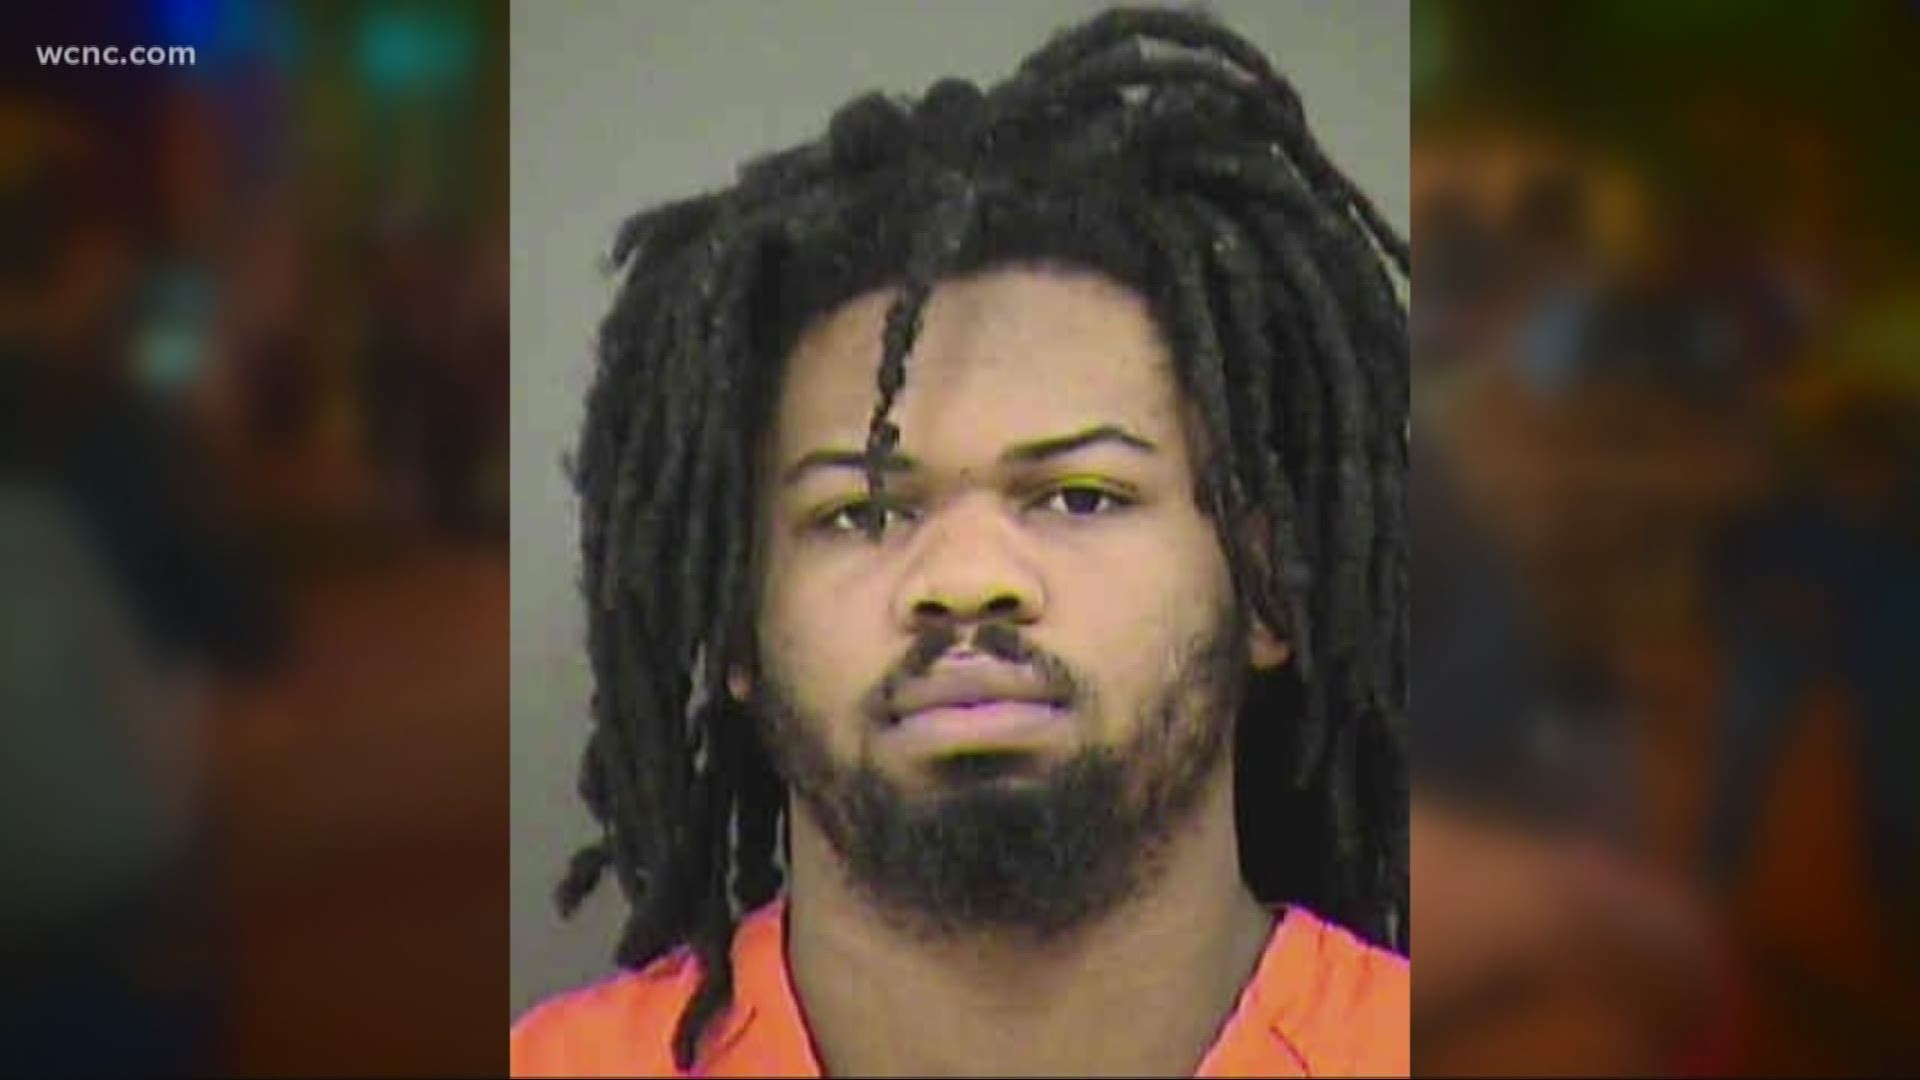 Rayquan Borum is accused of shooting and killing a protester during a 2016 riot. Details were released from the suspect's interview with police and calls he made from behind bars.